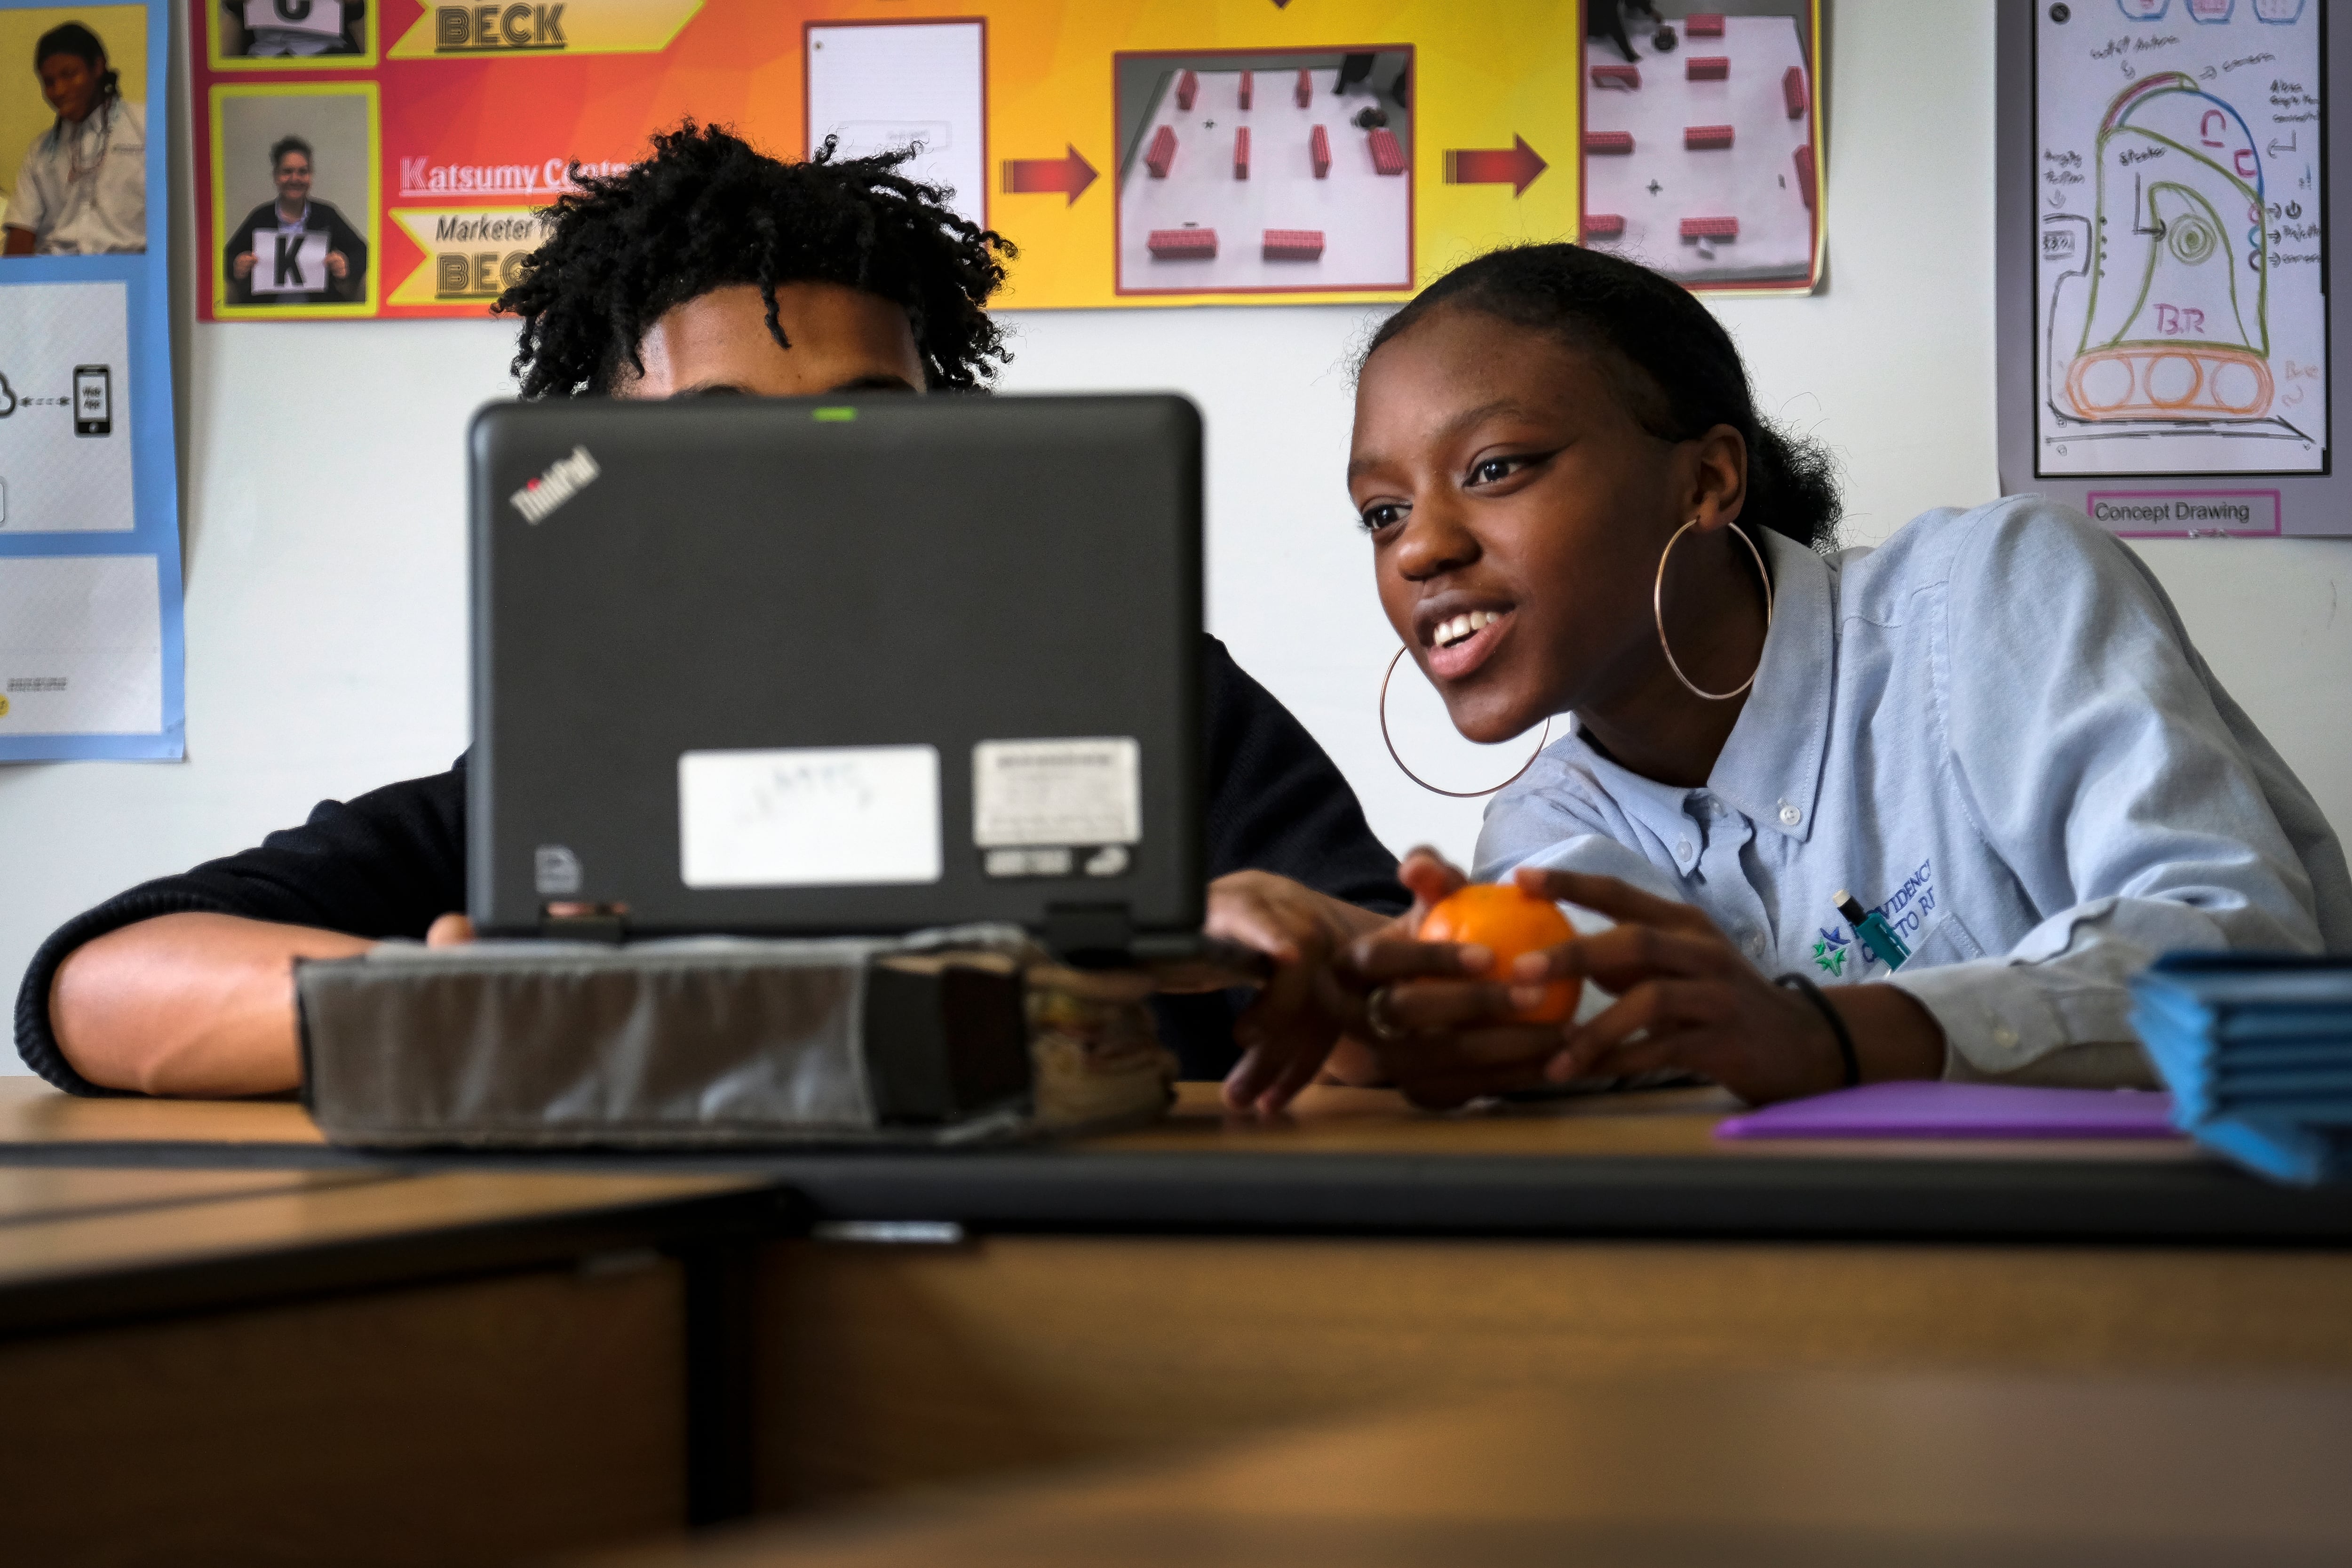 Two students sit at a wooden desk with school posters in the background. The student on the left is covered by a laptop and the student on the right is talking to the student and looking at the computer.